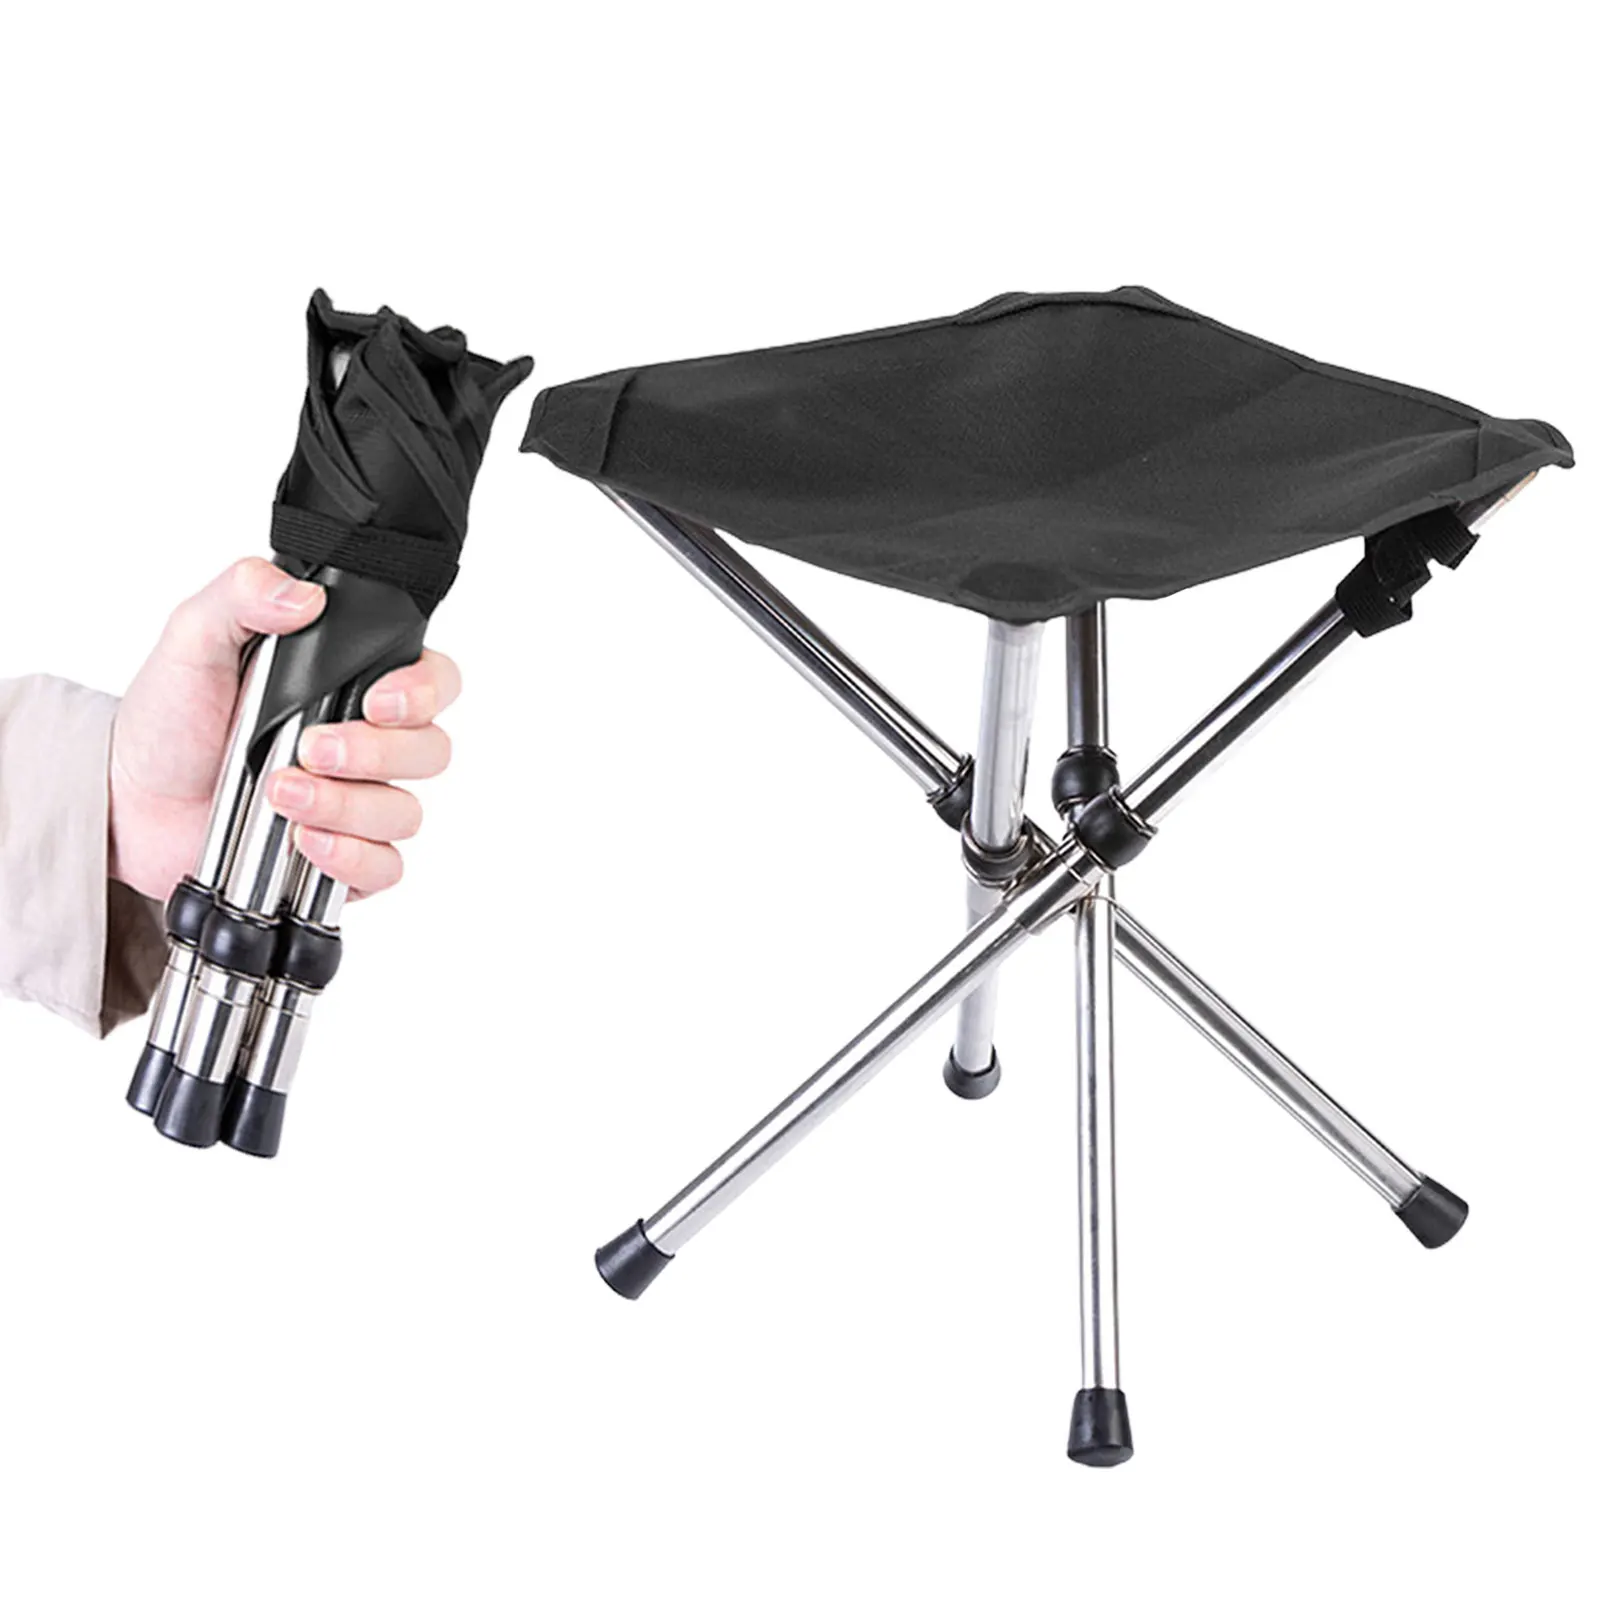 

Folding Camping Tripod Stools Portable Picnic Stool With 3 Legs Sturdy Picnic Chair Convenient To Use Easy To Carry Lightweight